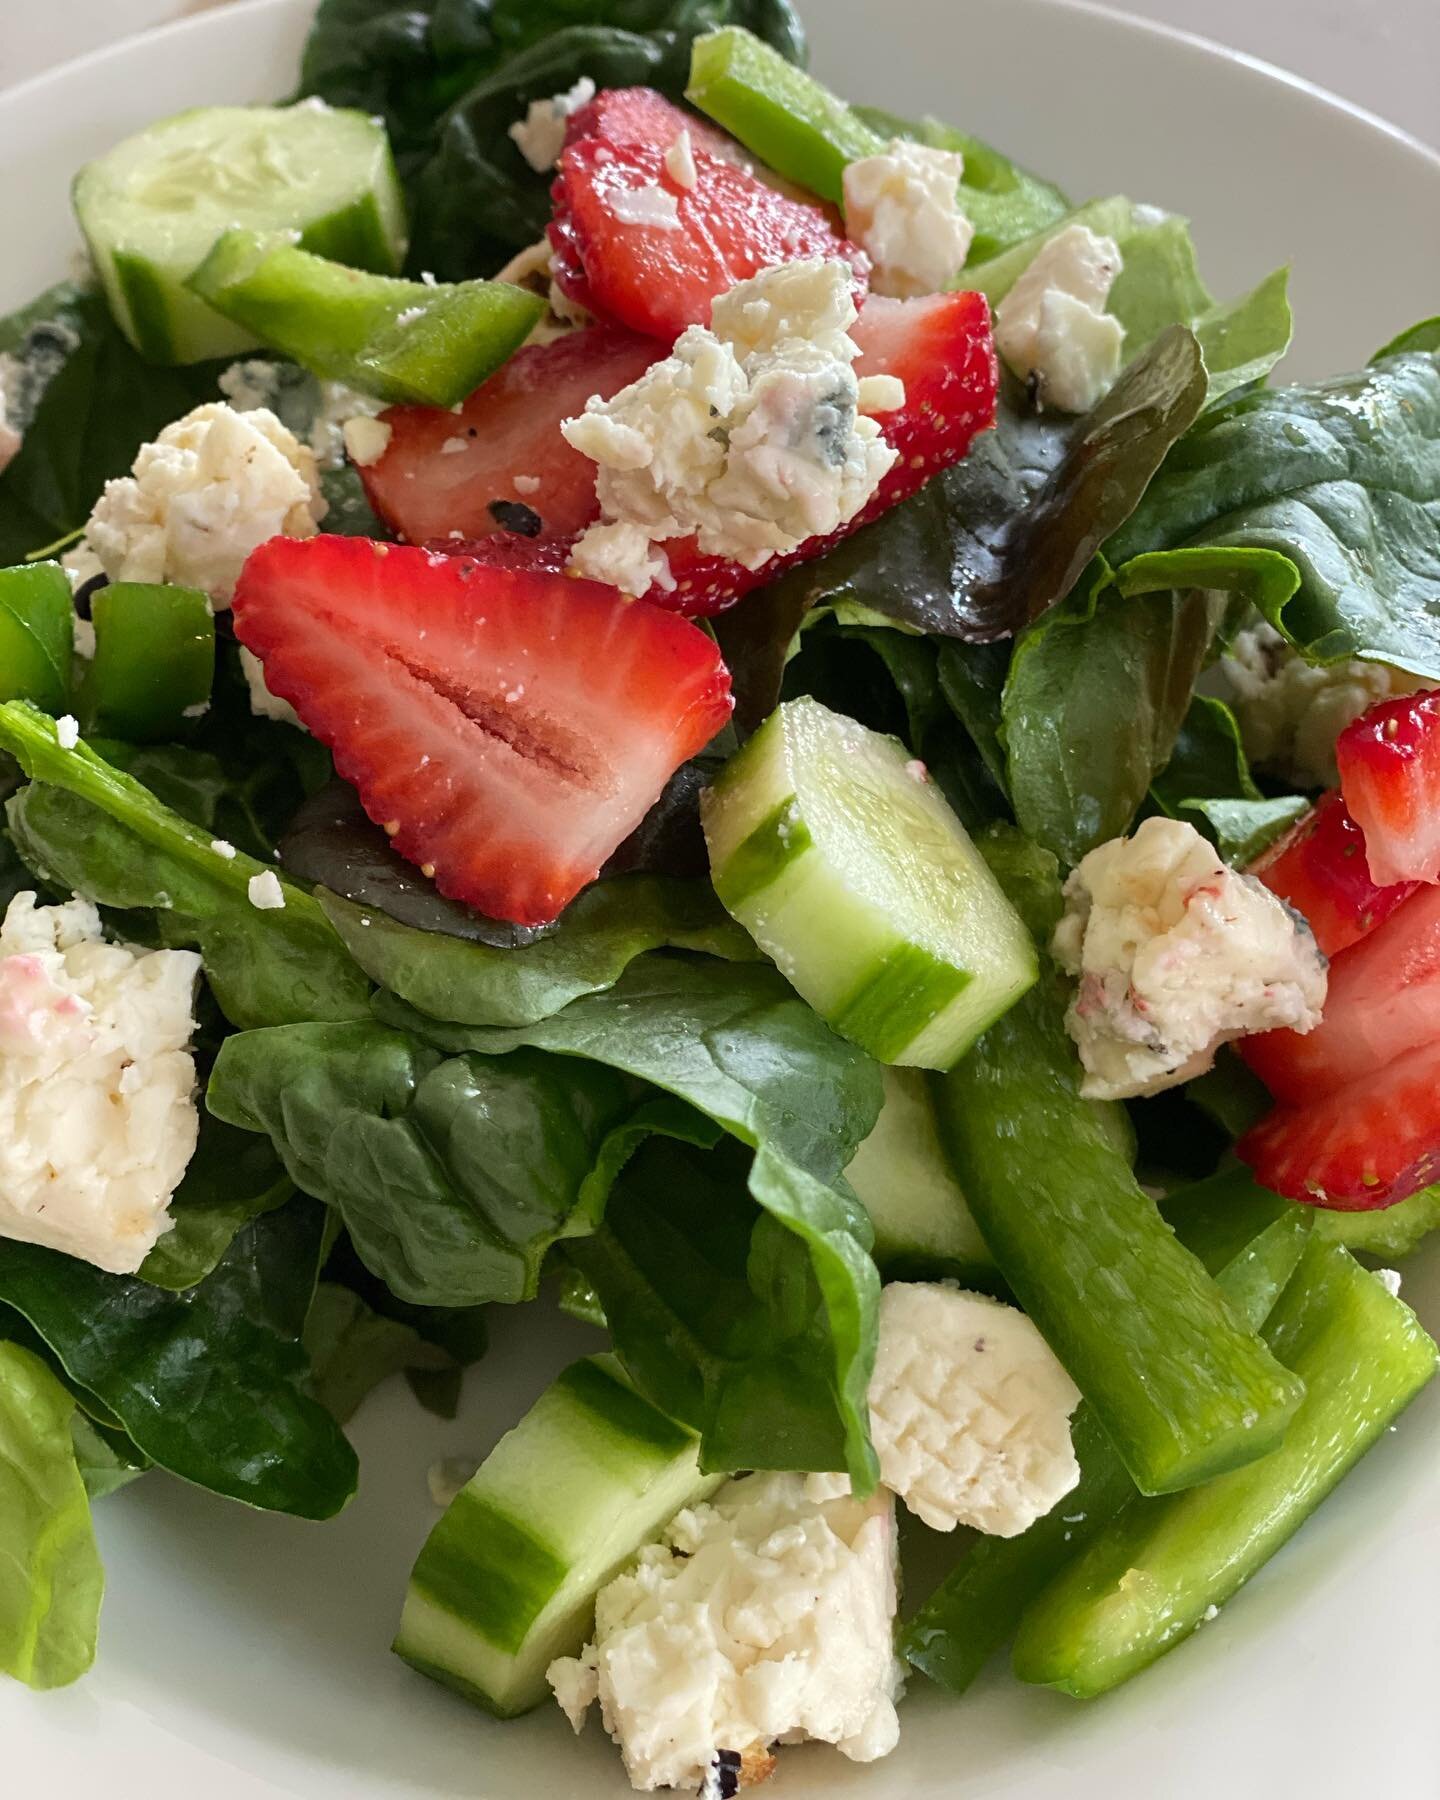 Blue cheese on your salad is the best! Blue Jay is a triple cream blue studded with juniper berries. Pair it with some Spinach from Andrews Family Farm and strawberries. Mmmmmmmmm!#cheese #bluecheese #salad #strawberries #shoplocal #localfarms #easte